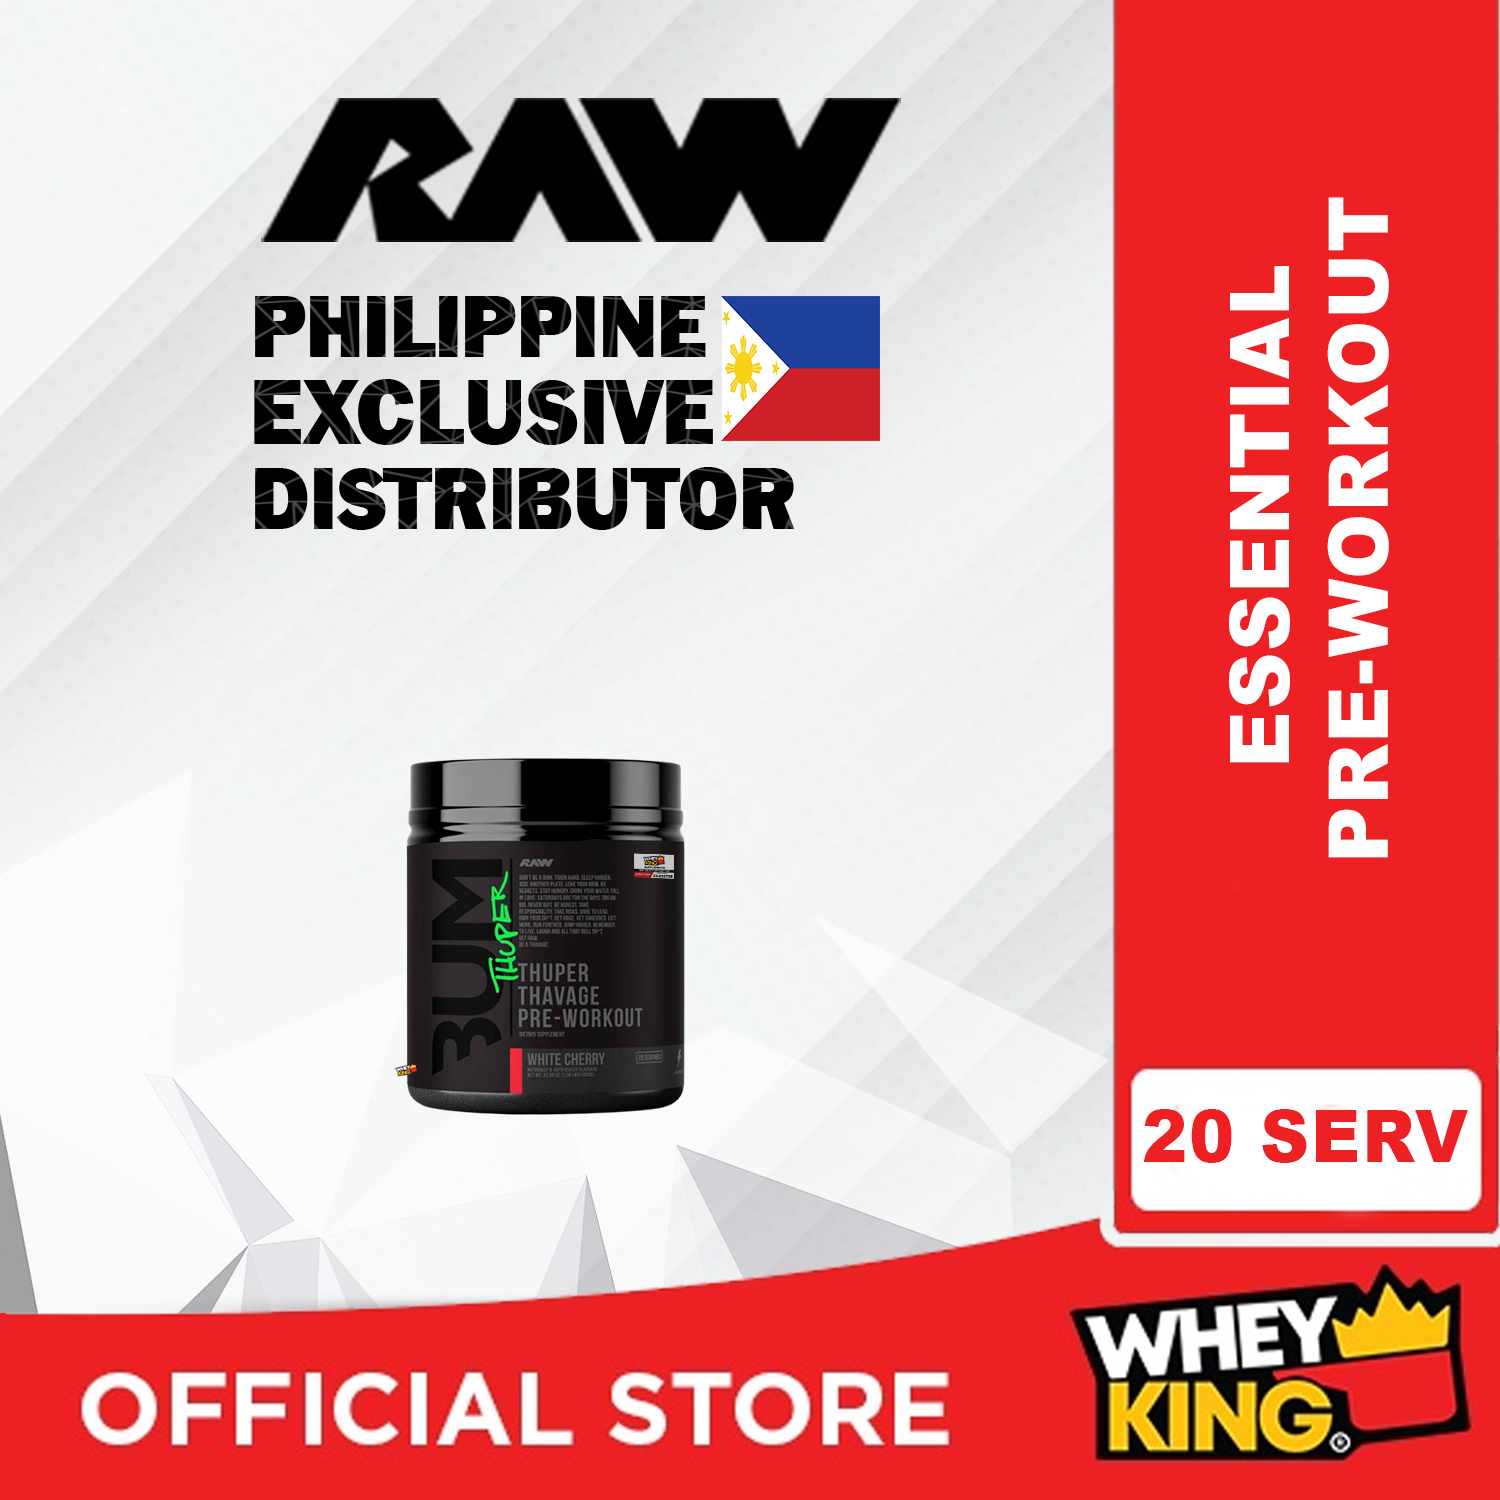 RAW Nutrition Thuper Thavage Pre-Workout